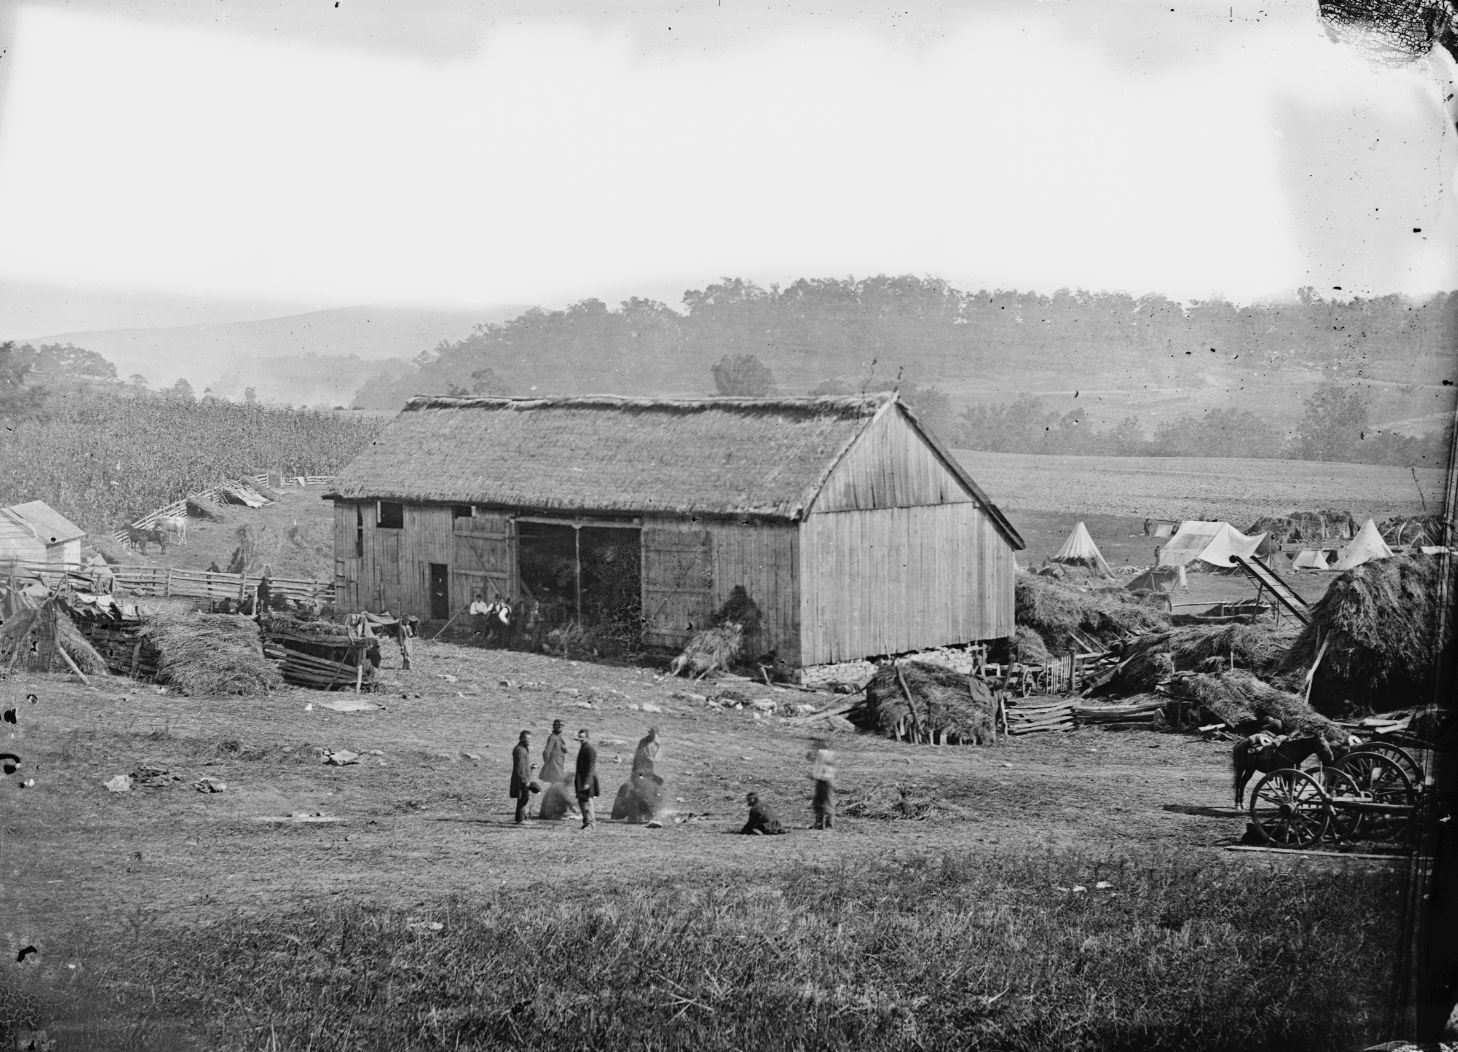 In nearby Keedysville, Maryland, a barn is used as a hospital after the Battle of Antietam.